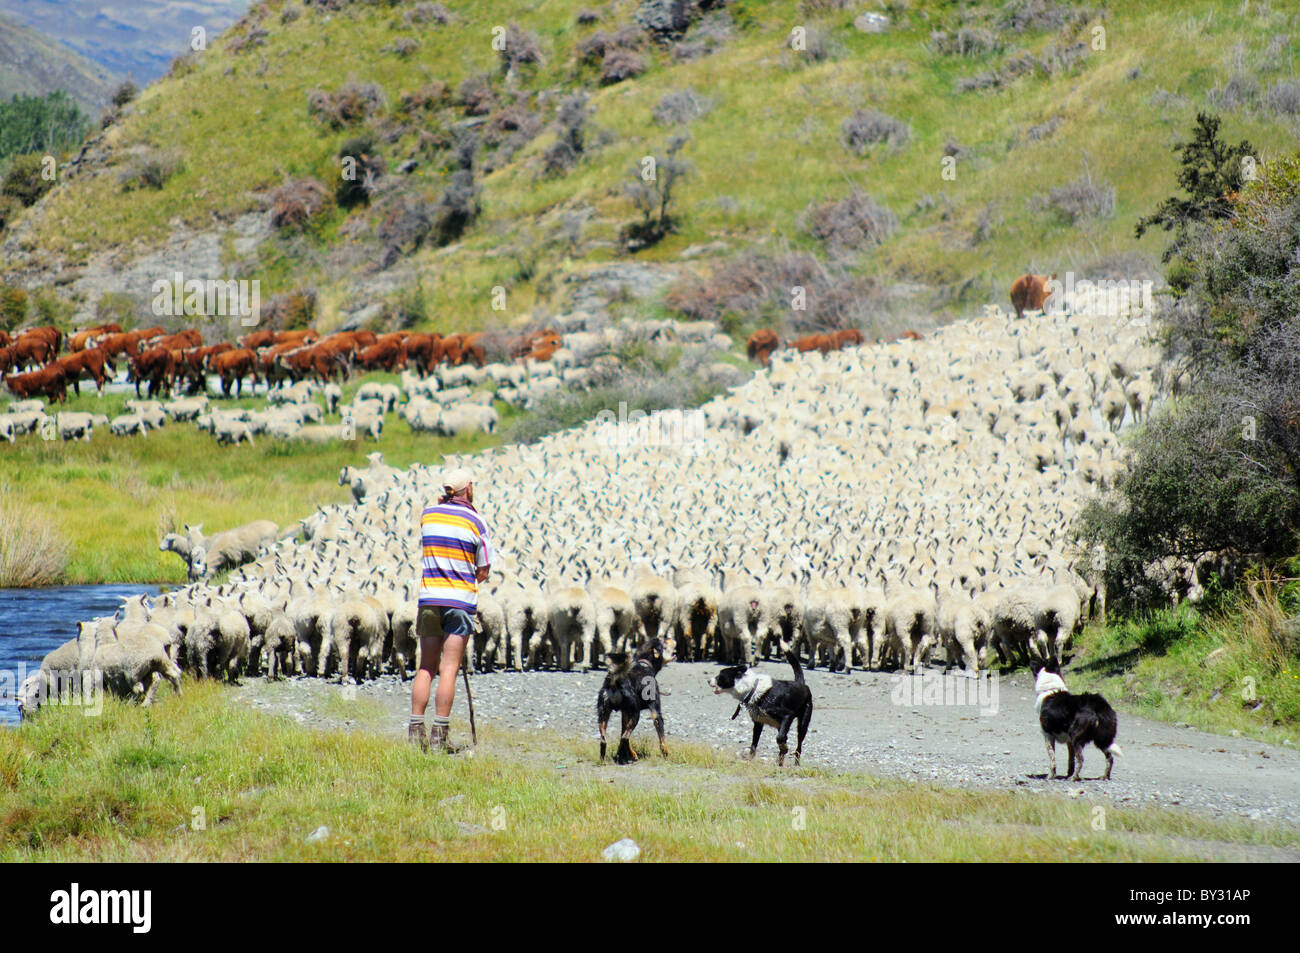 A shepherd and flock of sheep in new Zealand Stock Photo